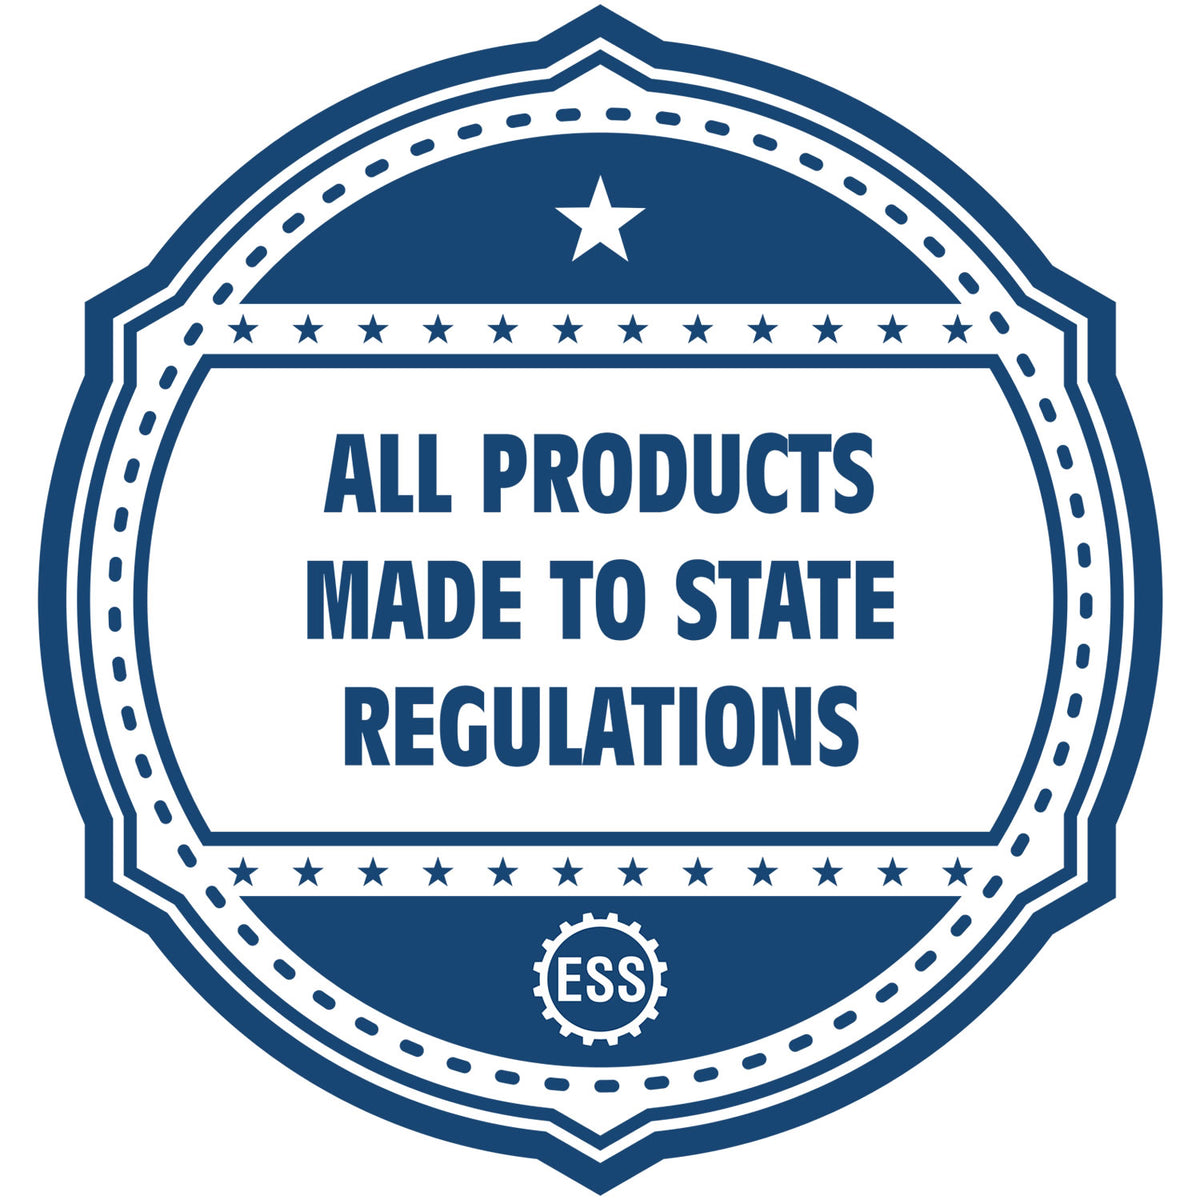 An icon or badge element for the Slim Pre-Inked Nevada Landscape Architect Seal Stamp showing that this product is made in compliance with state regulations.